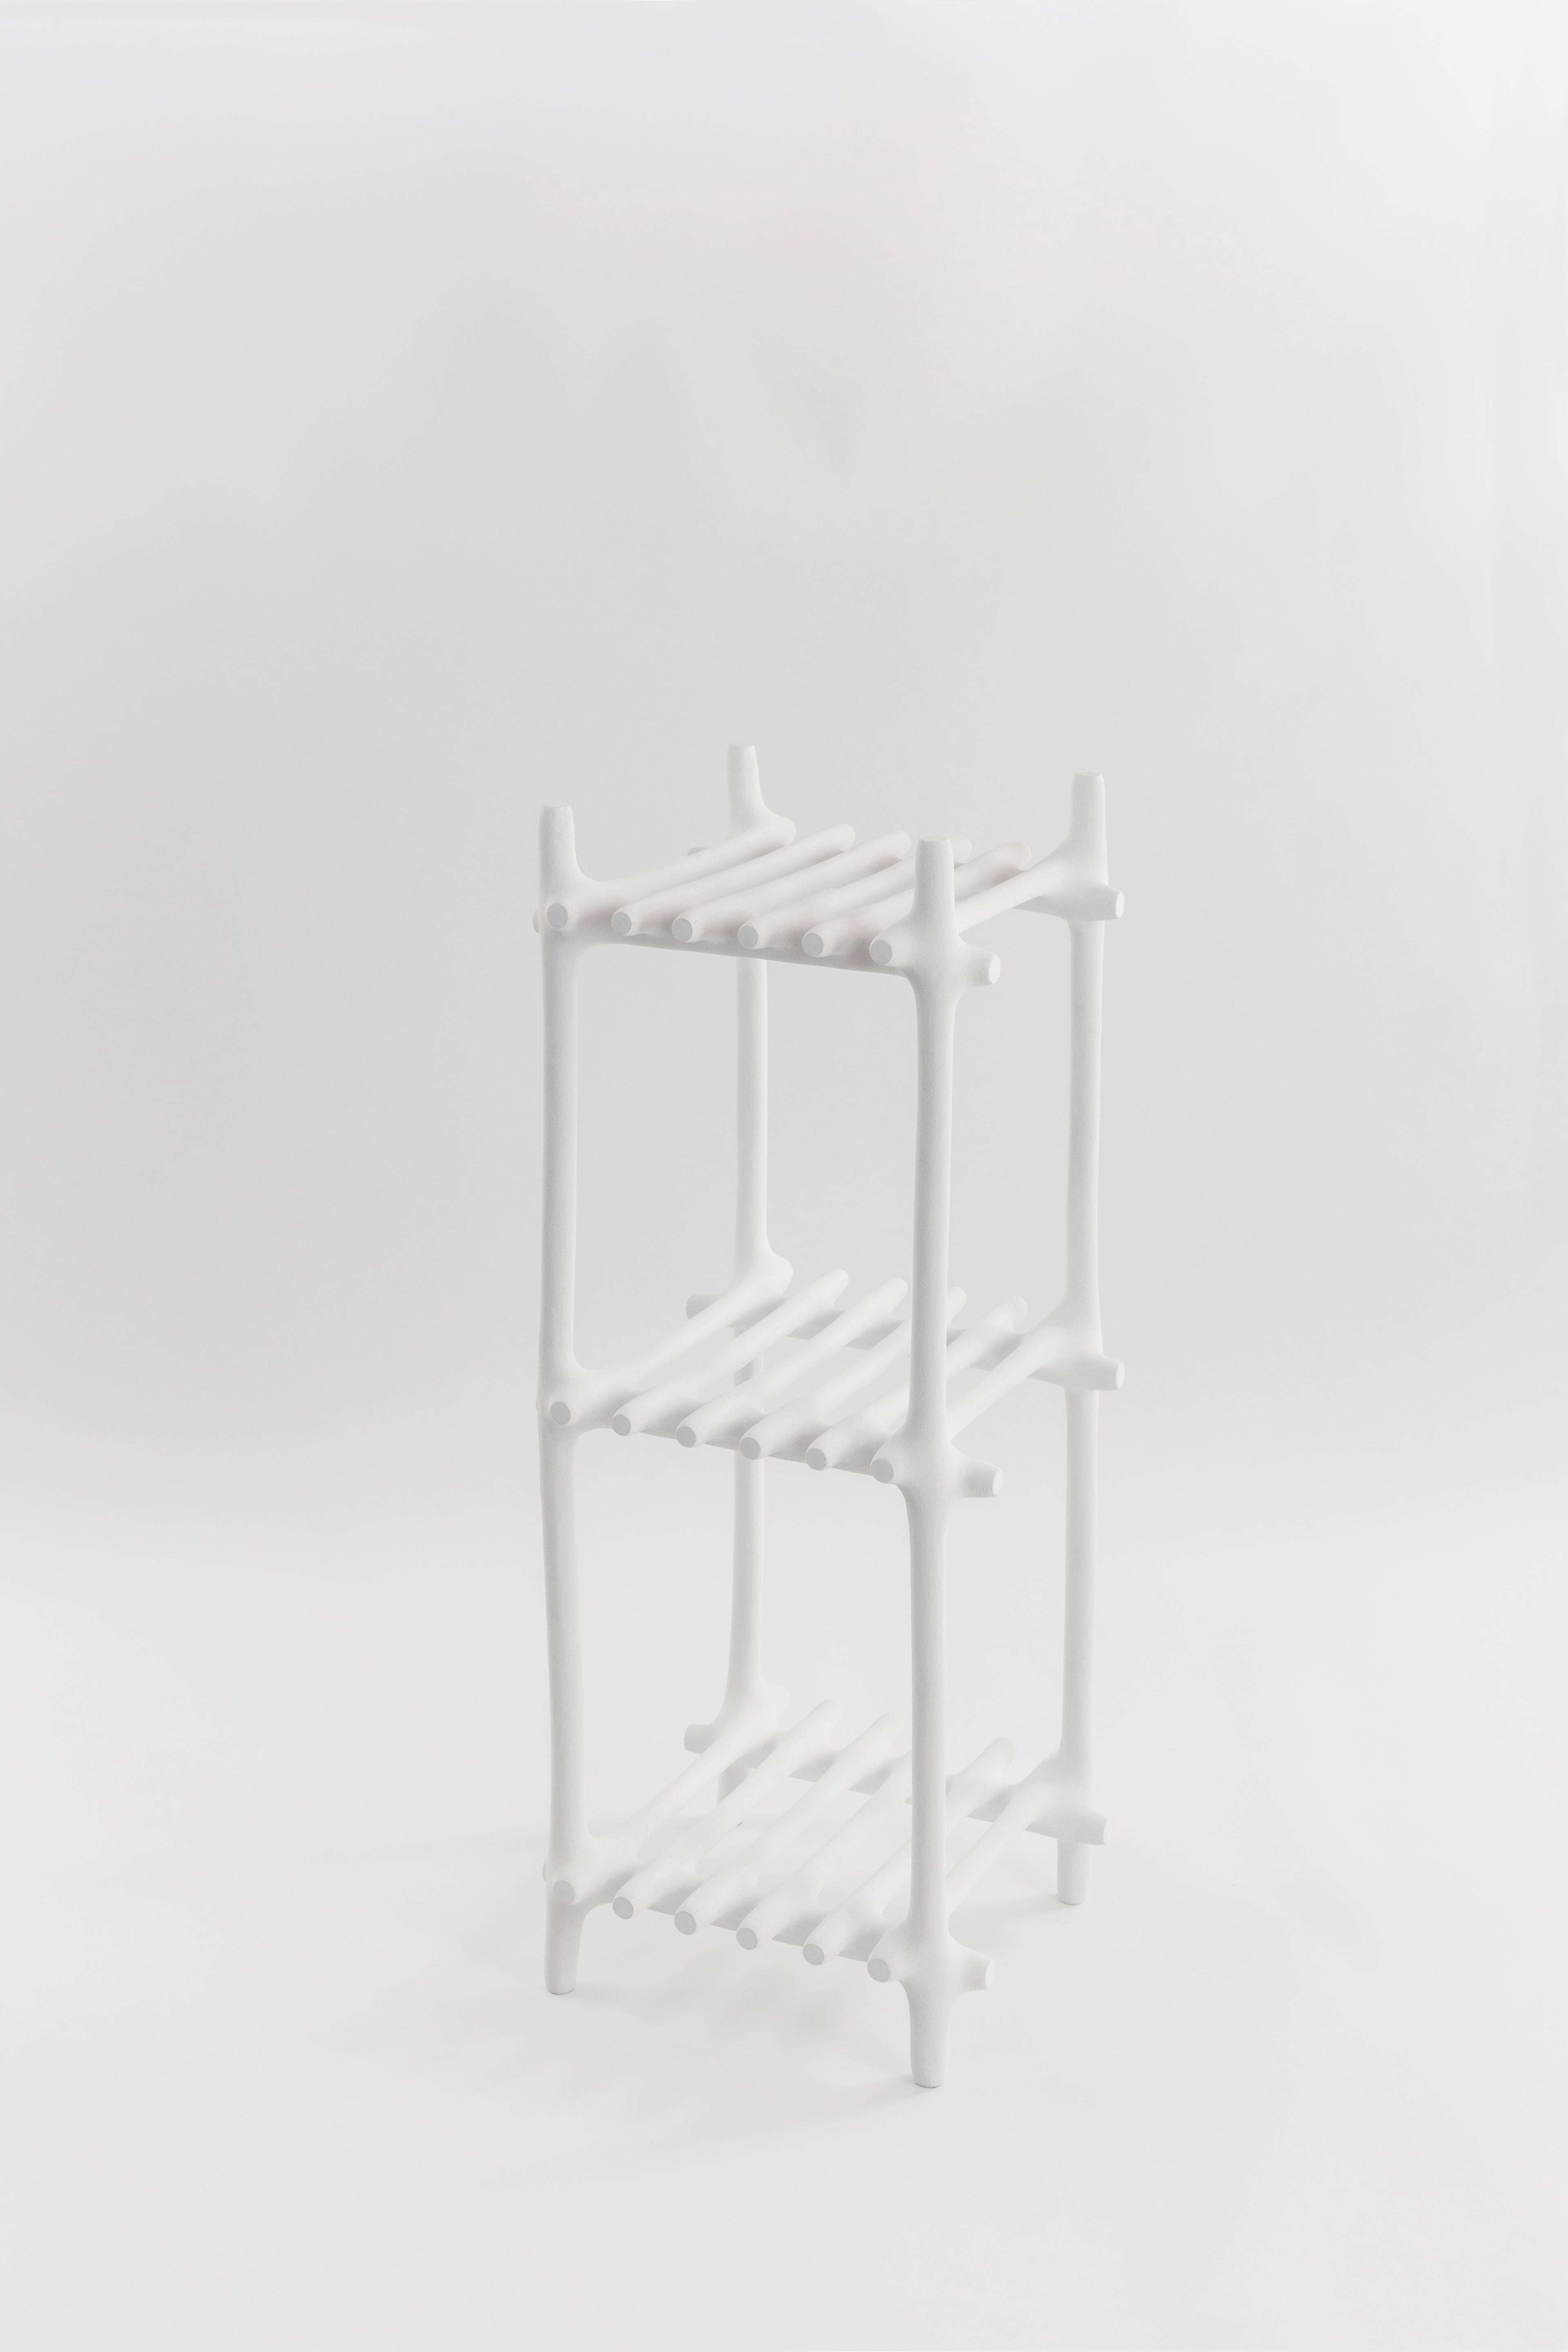 Basic shelf by Hot Wire Extensions
Limited edition
Materials: Waste SLS 3D nylon powder, Sand from sustainable sources
Dimensions: H 112 x W 42 x D 42 cm 
Colour: white

Hot Wire Extensions is a young sustainable design brand, presenting a bold